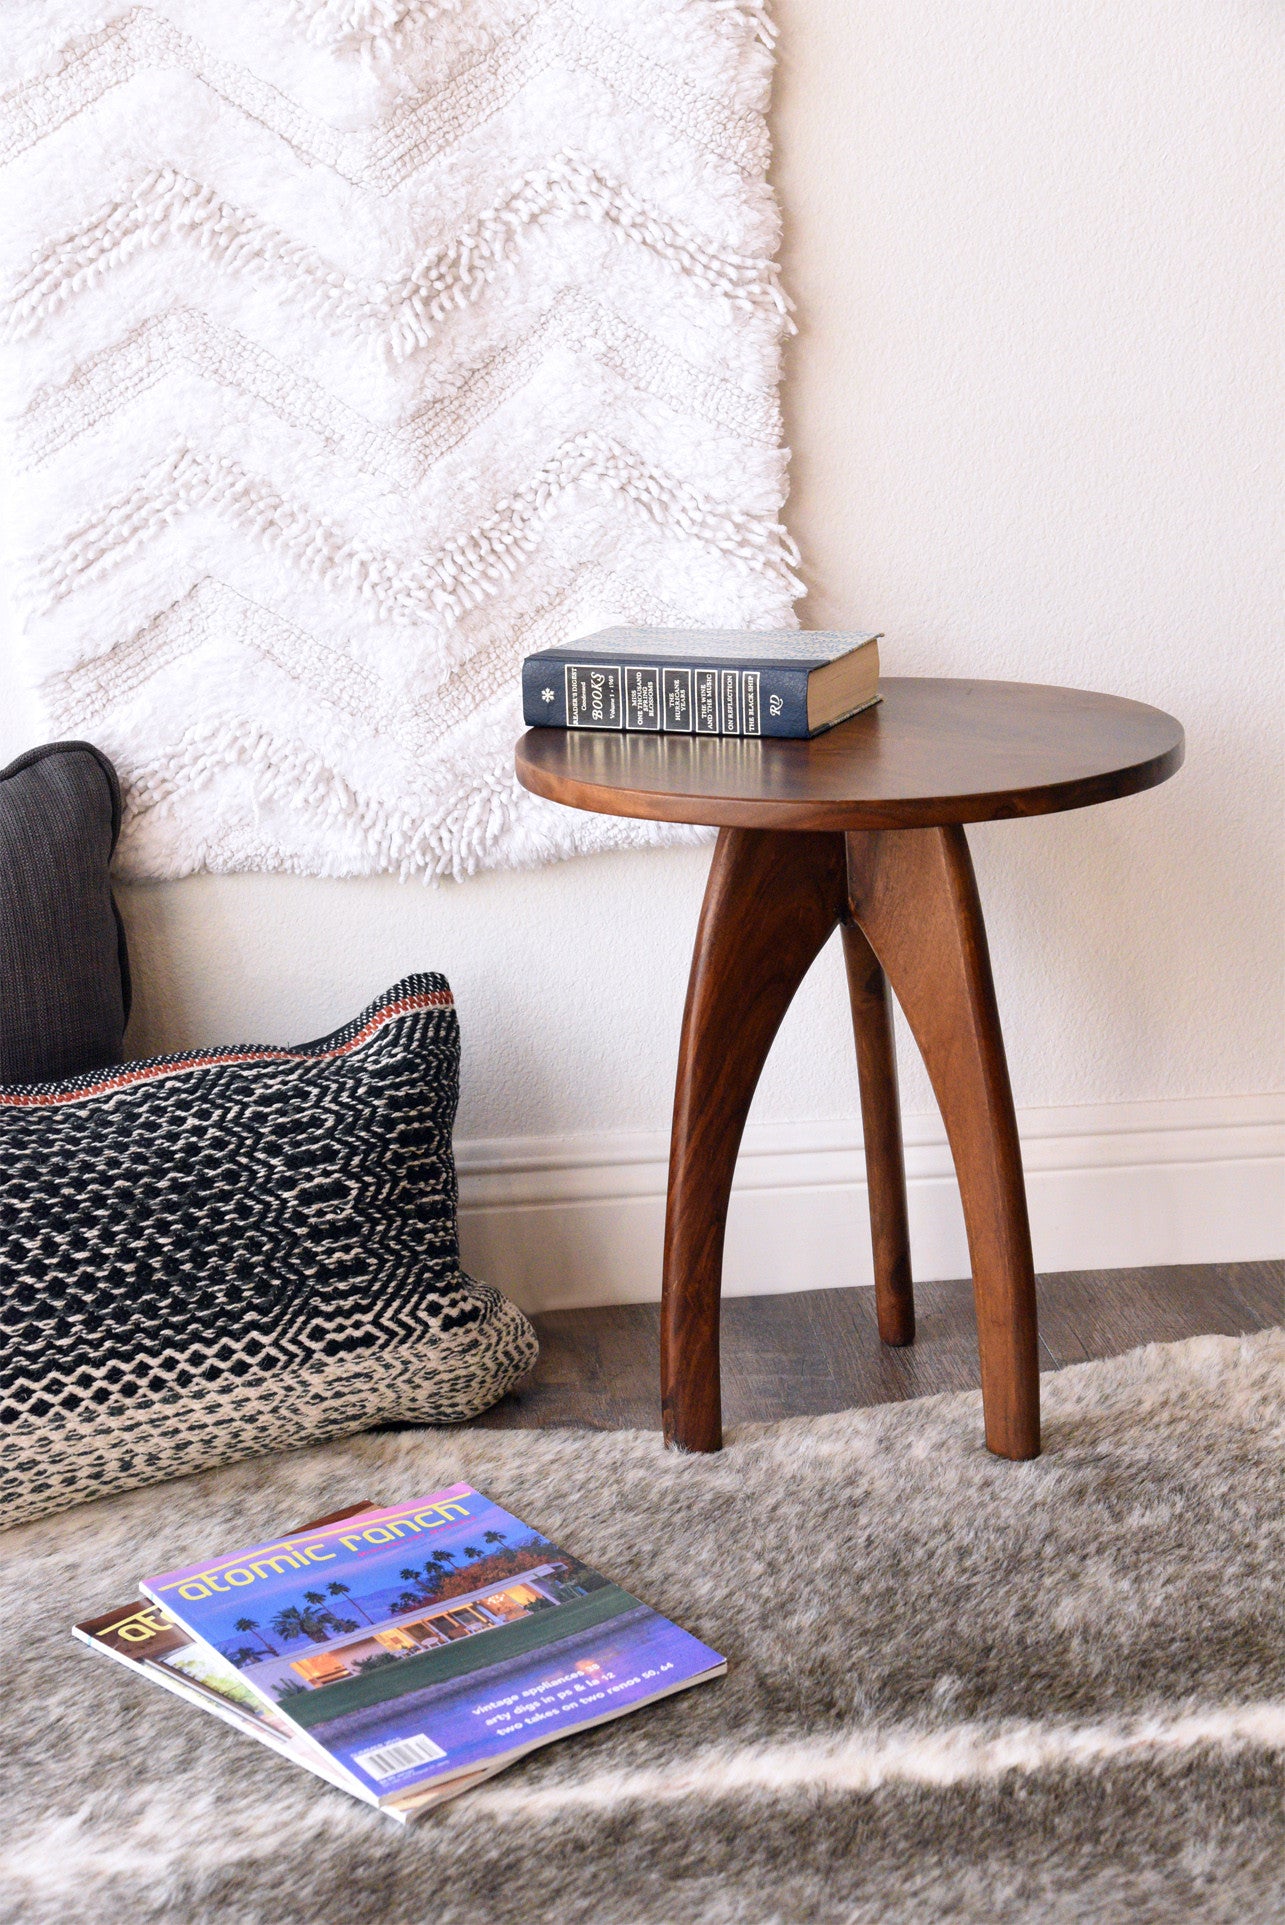 Retro Solid Wood Side Table